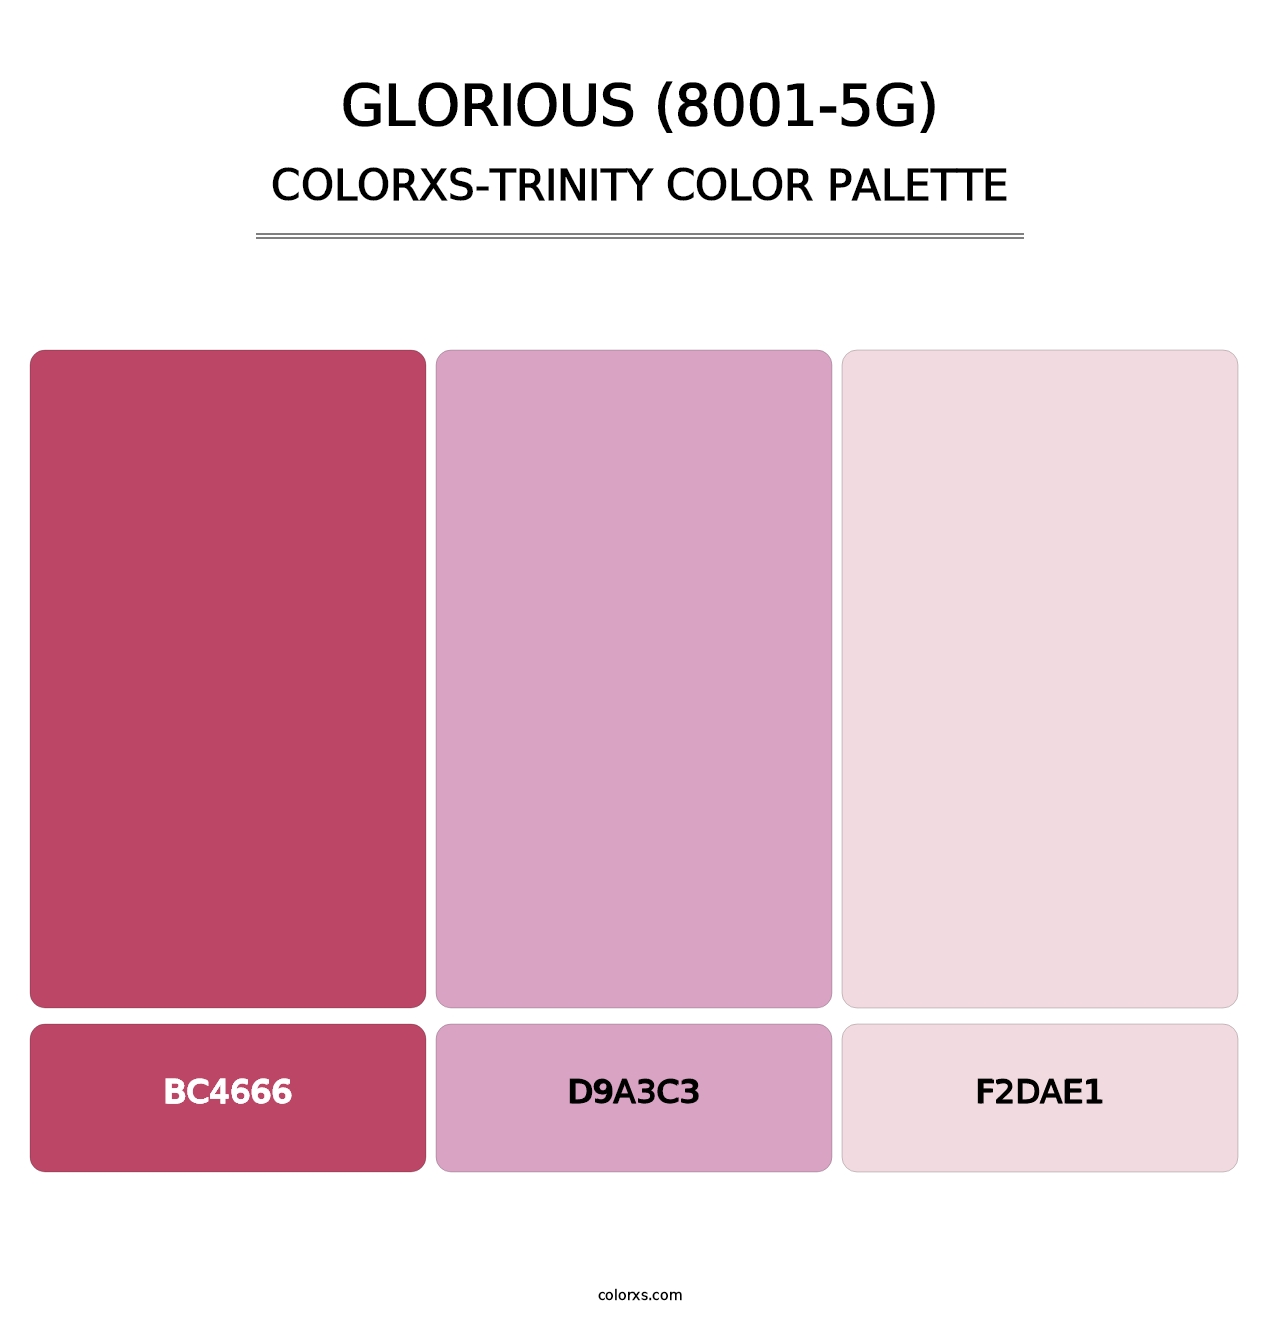 Glorious (8001-5G) - Colorxs Trinity Palette